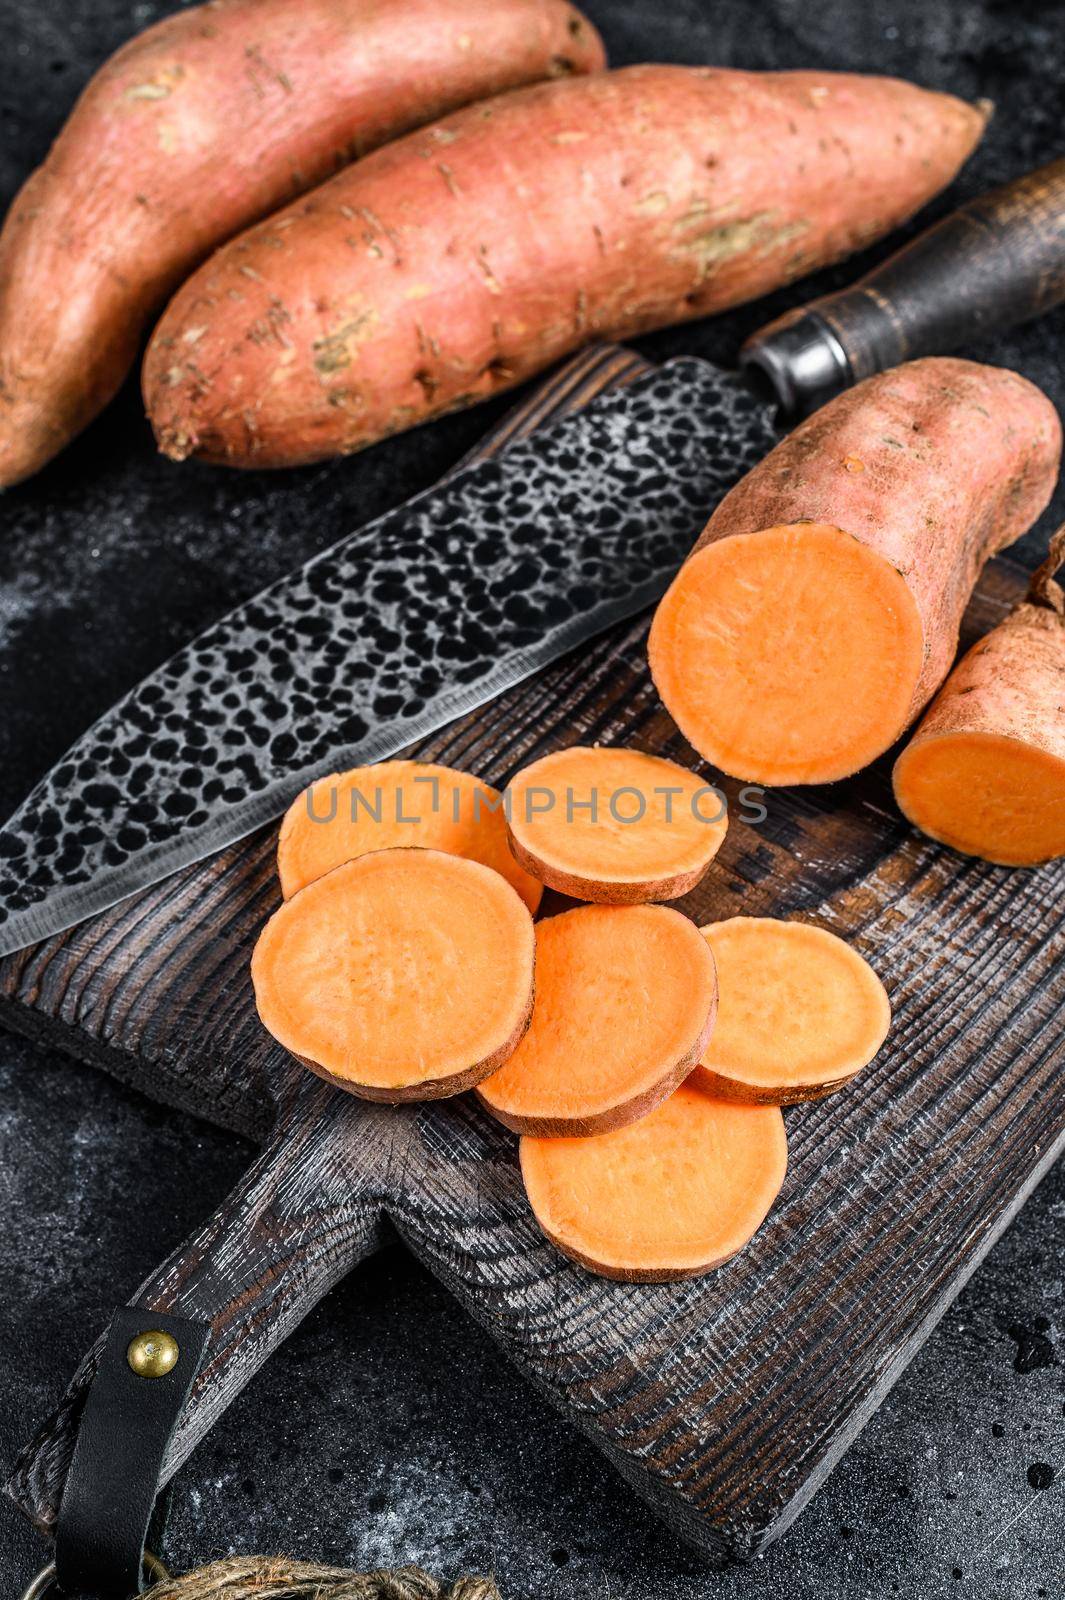 Raw cut batata Sweet potato on Wooden cutting board. Black background. Top view by Composter